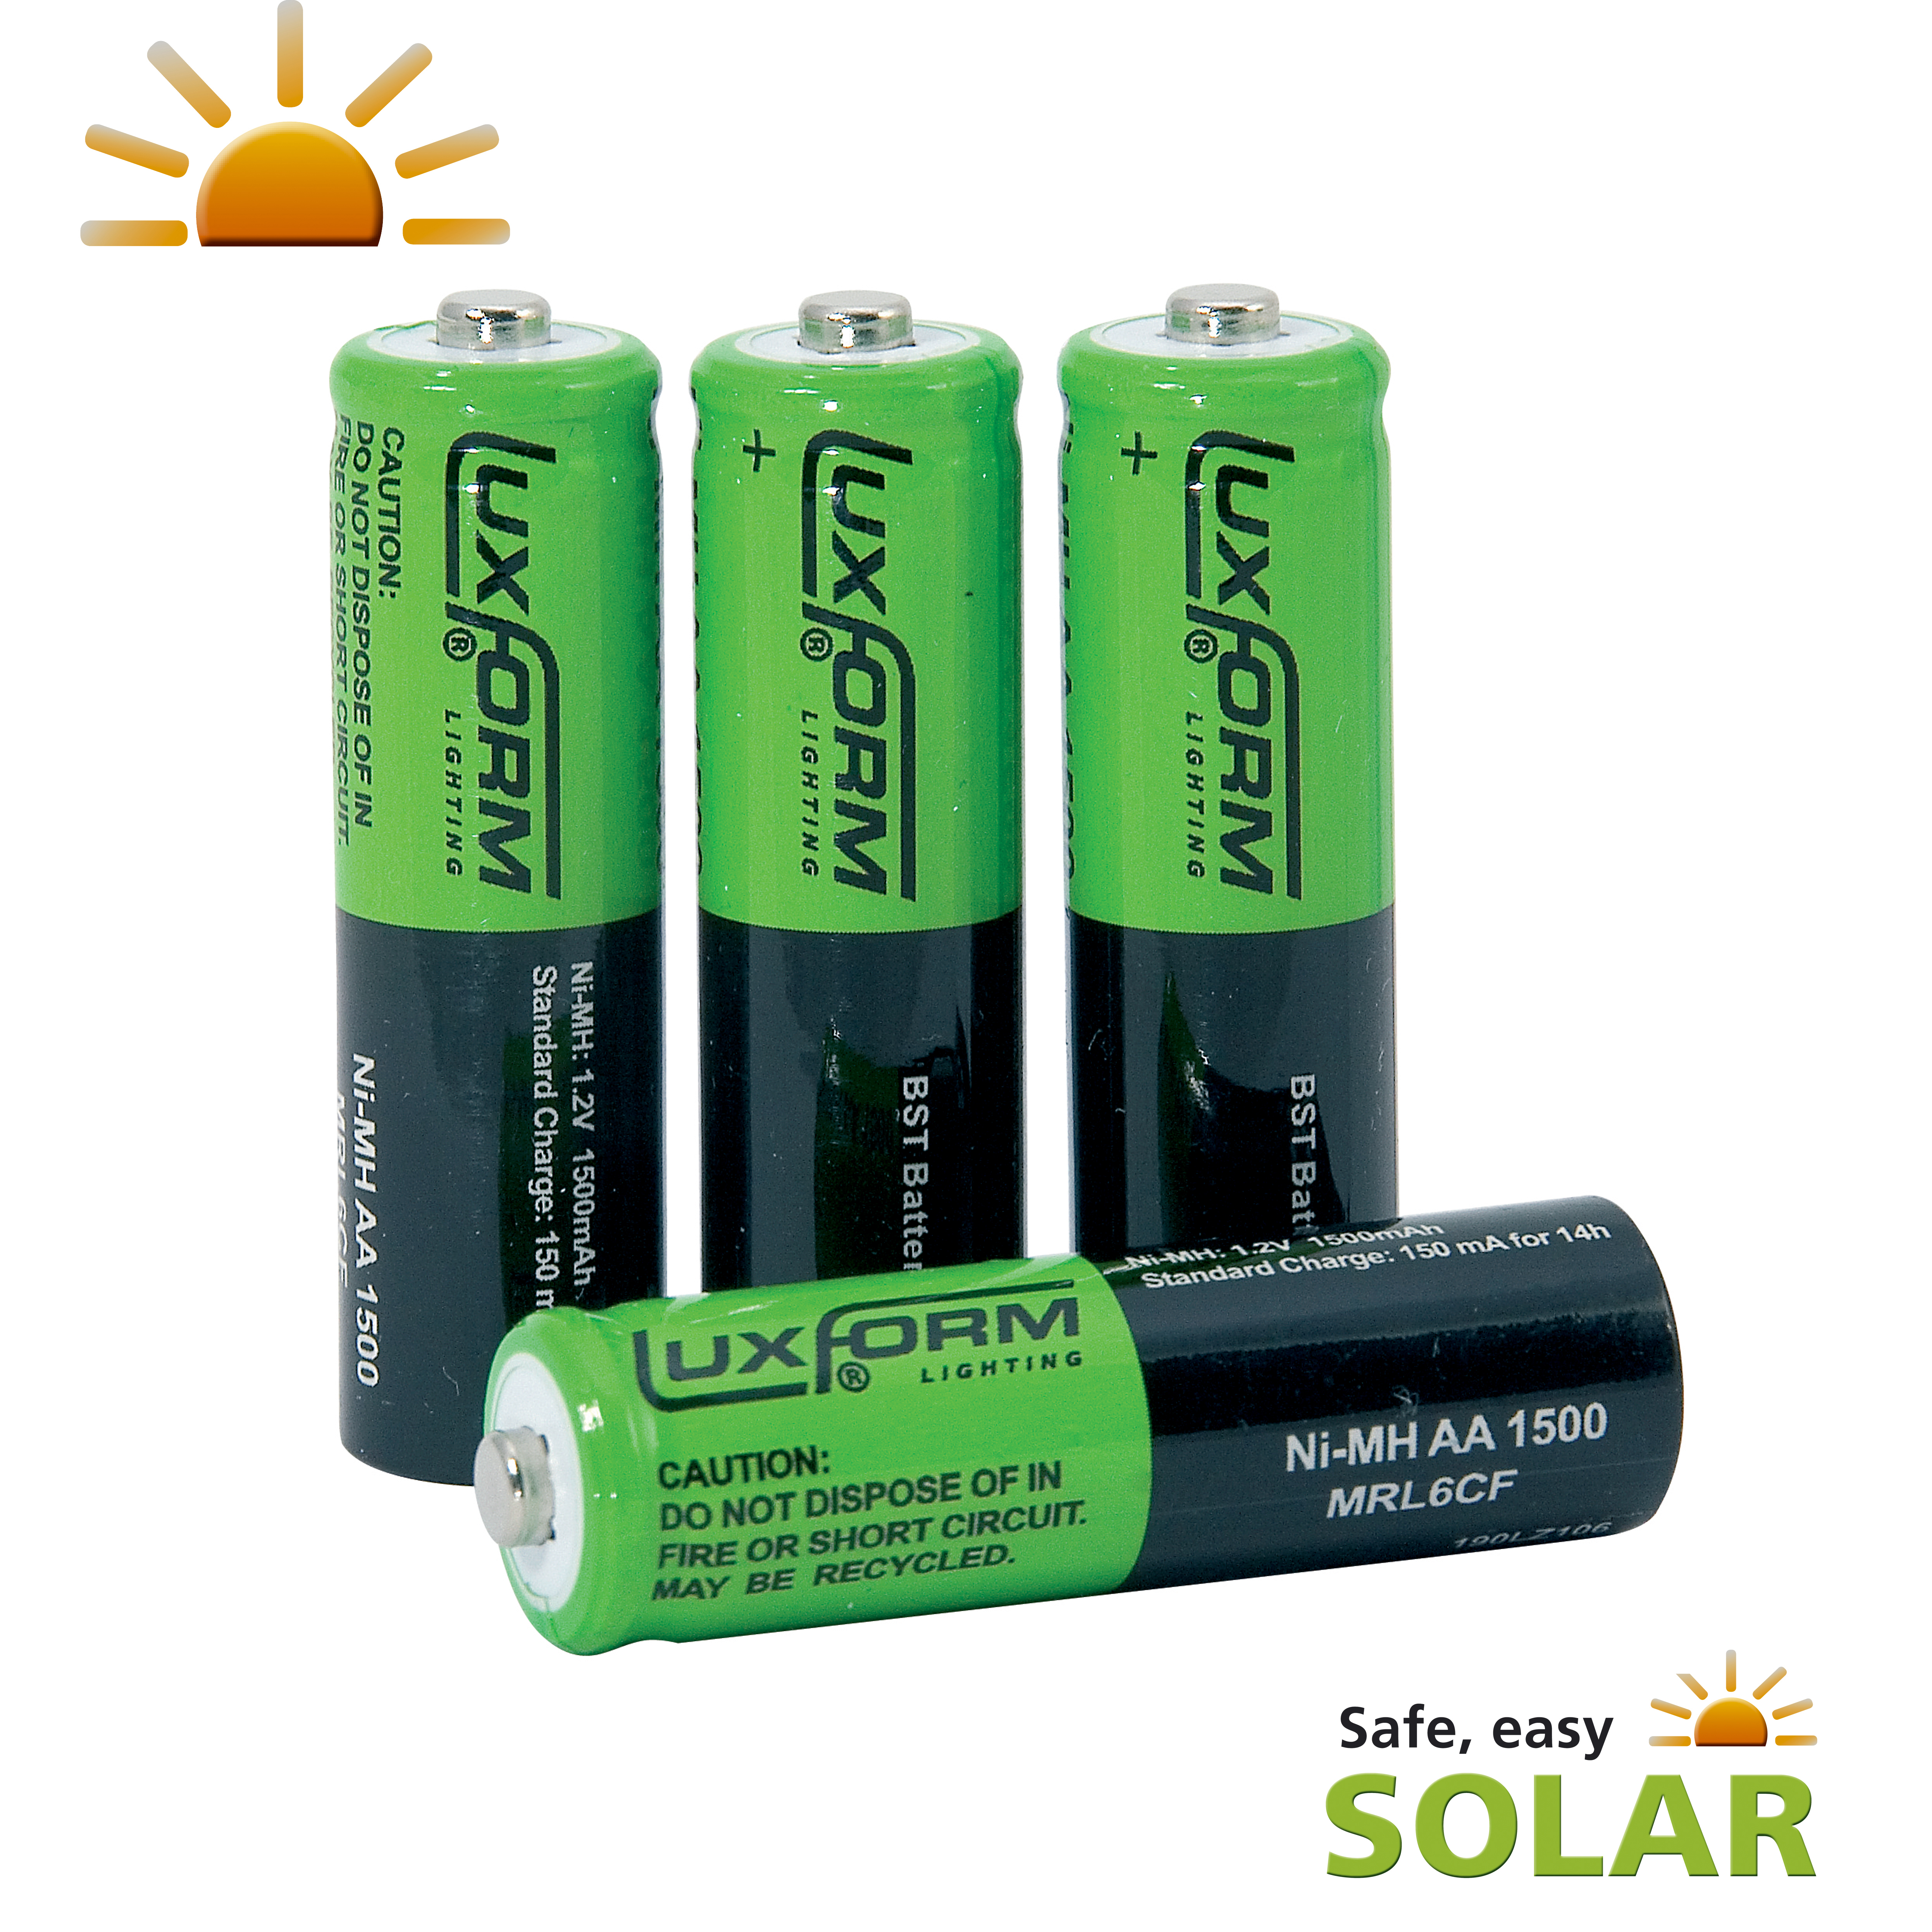 Luxform AA Solar Rechargeable Battery 800mAh 12v 4 Pack